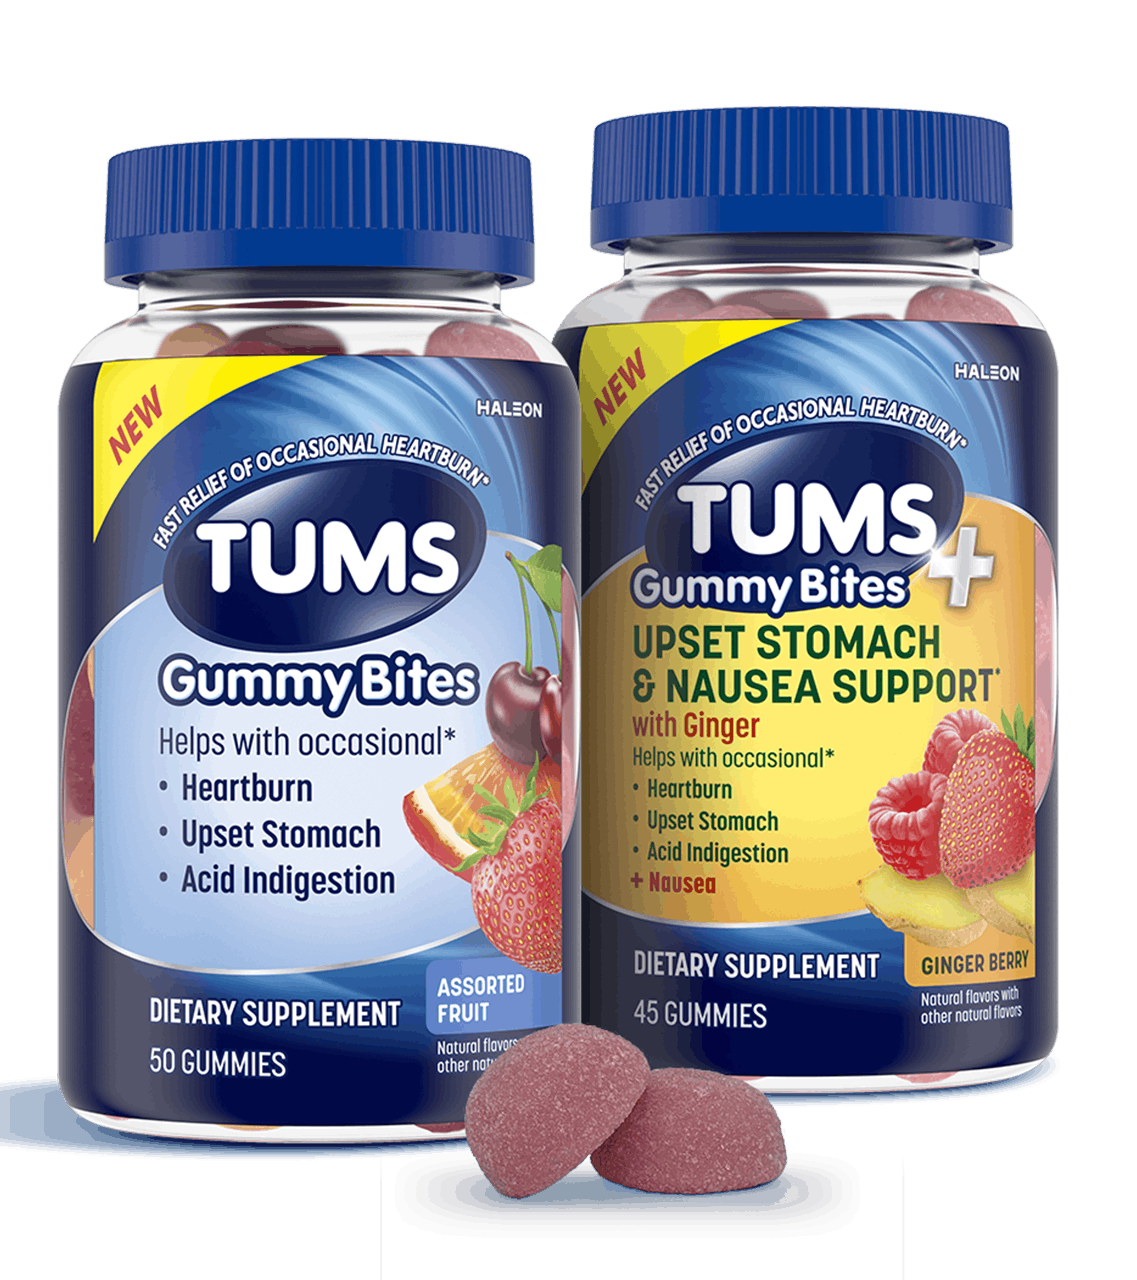 TUMS+ Upset Stomach & Nausea Support Ginger Berry & TUMS Gummy Bites Assorted Fruit Products with gummies